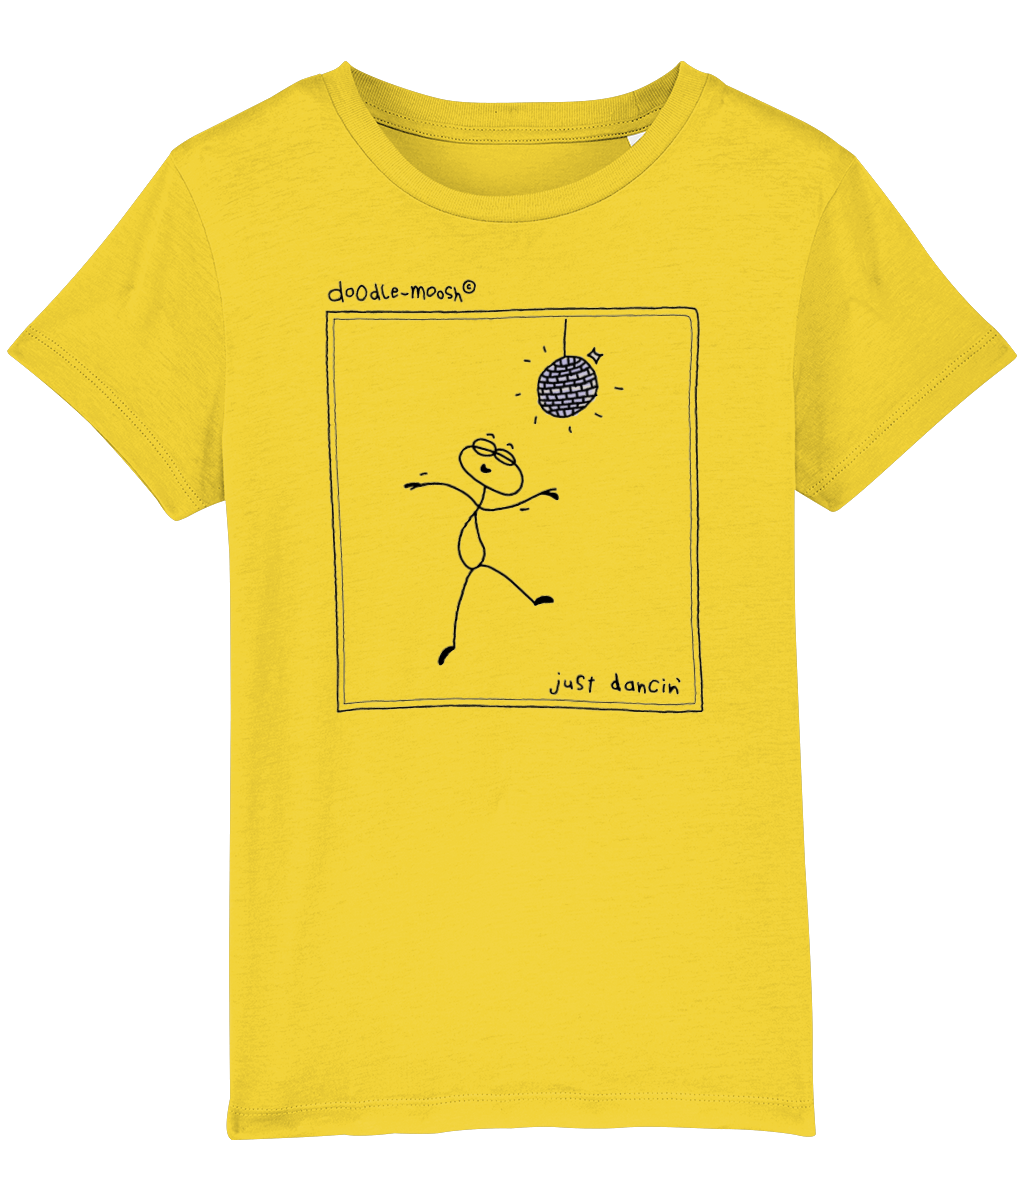 Just dancing t-shirt, yellow with black, colorful drawing